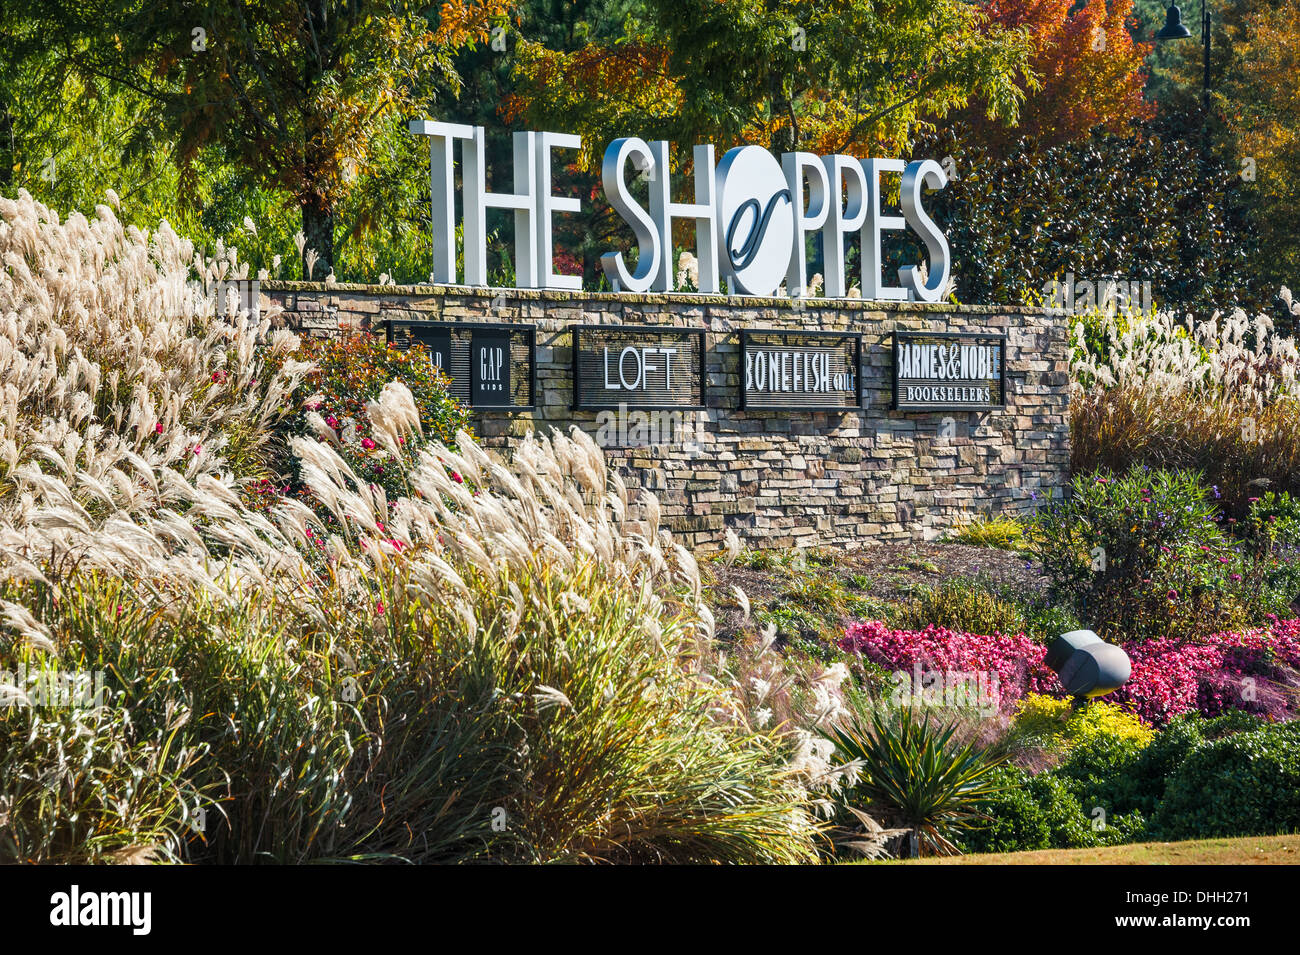 Beautiful Foliage Surrounds The Entrance Signage Of An Outdoor